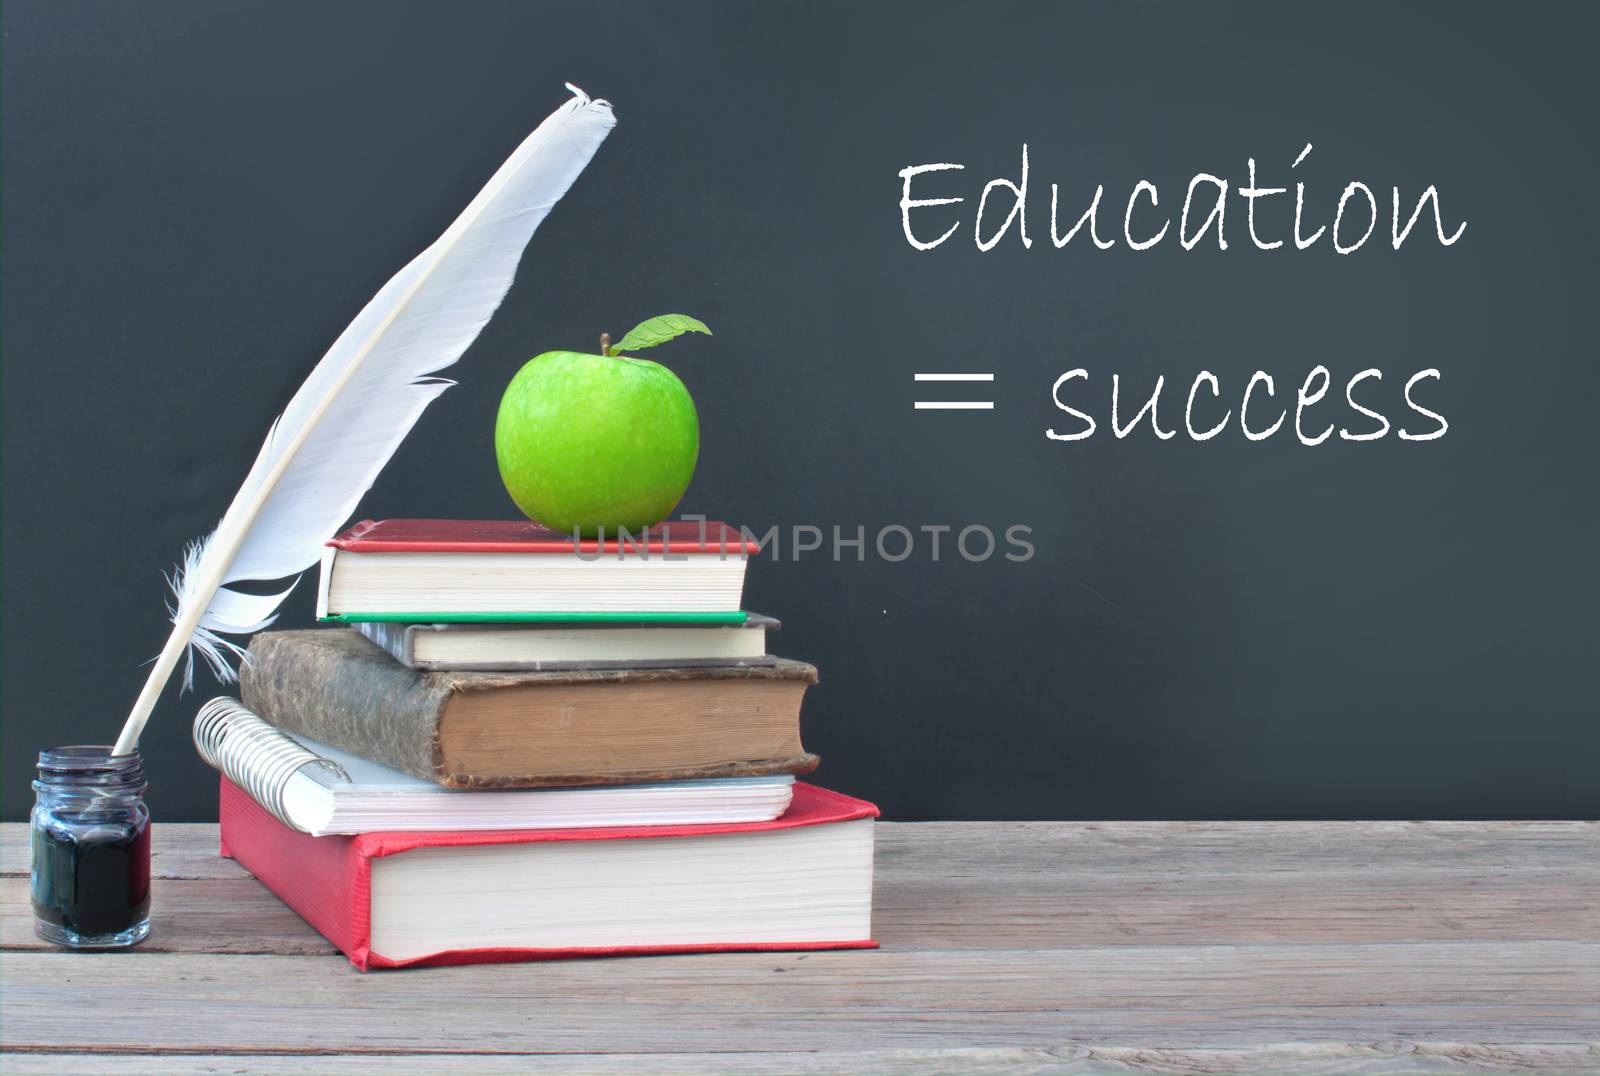 Education success written on a blackboard with a pile of books, quill and ink